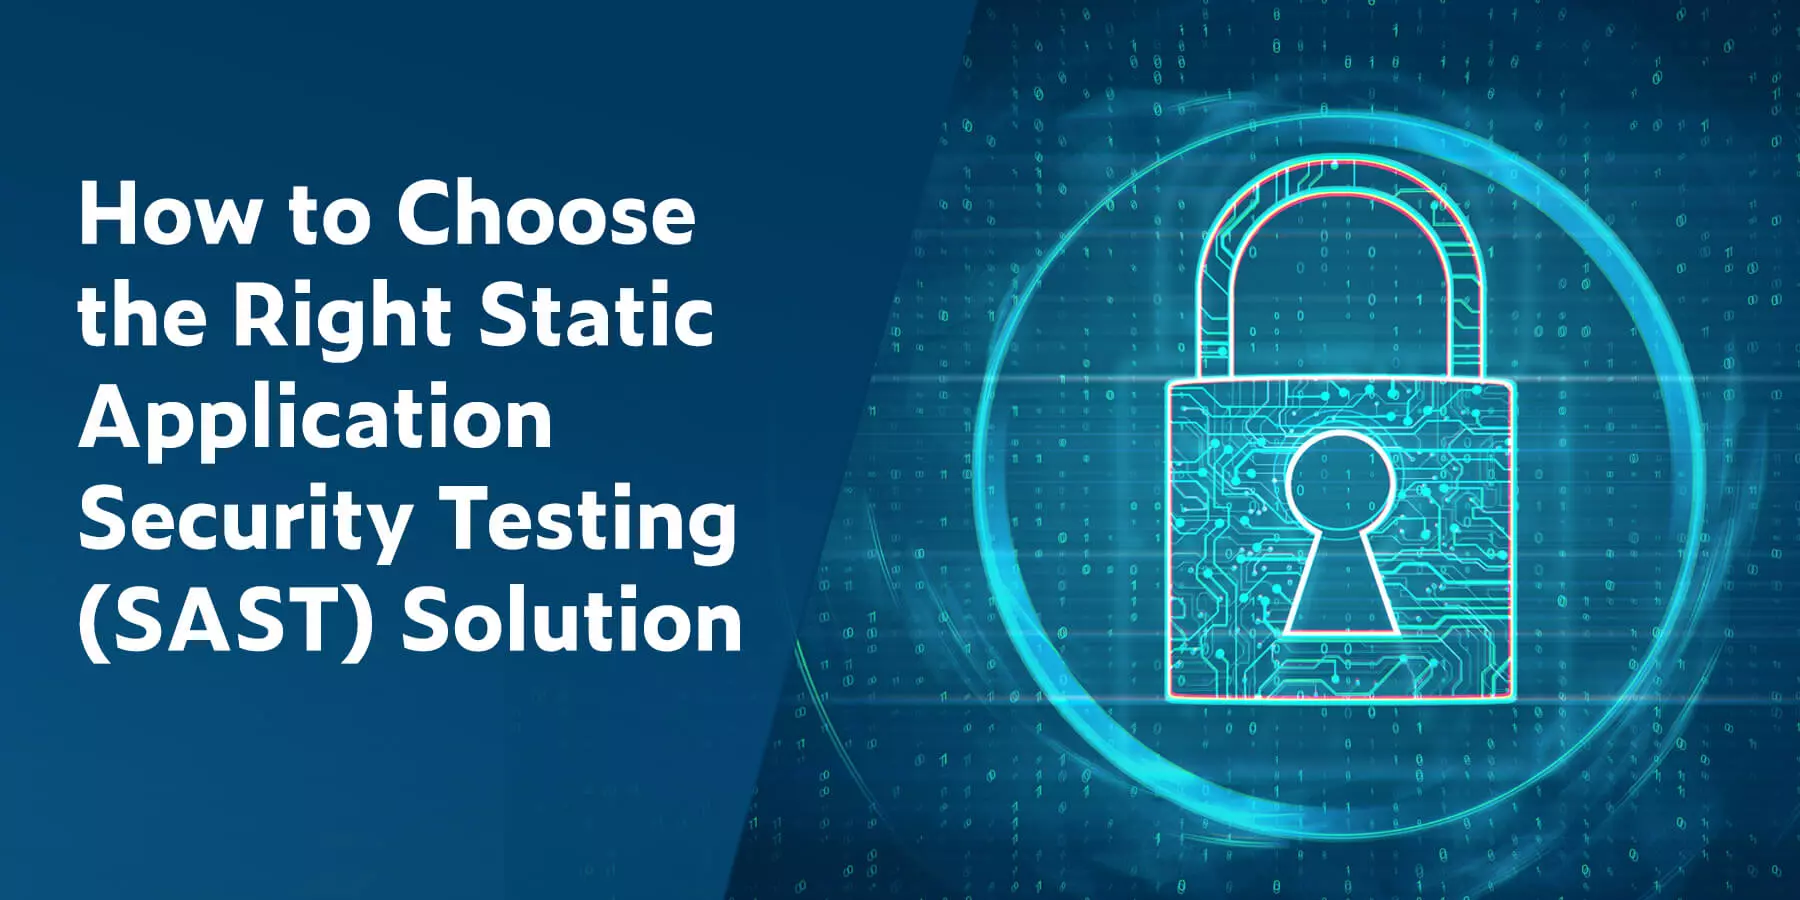 How to Choose the Right Static Application Security Testing (SAST) Solution